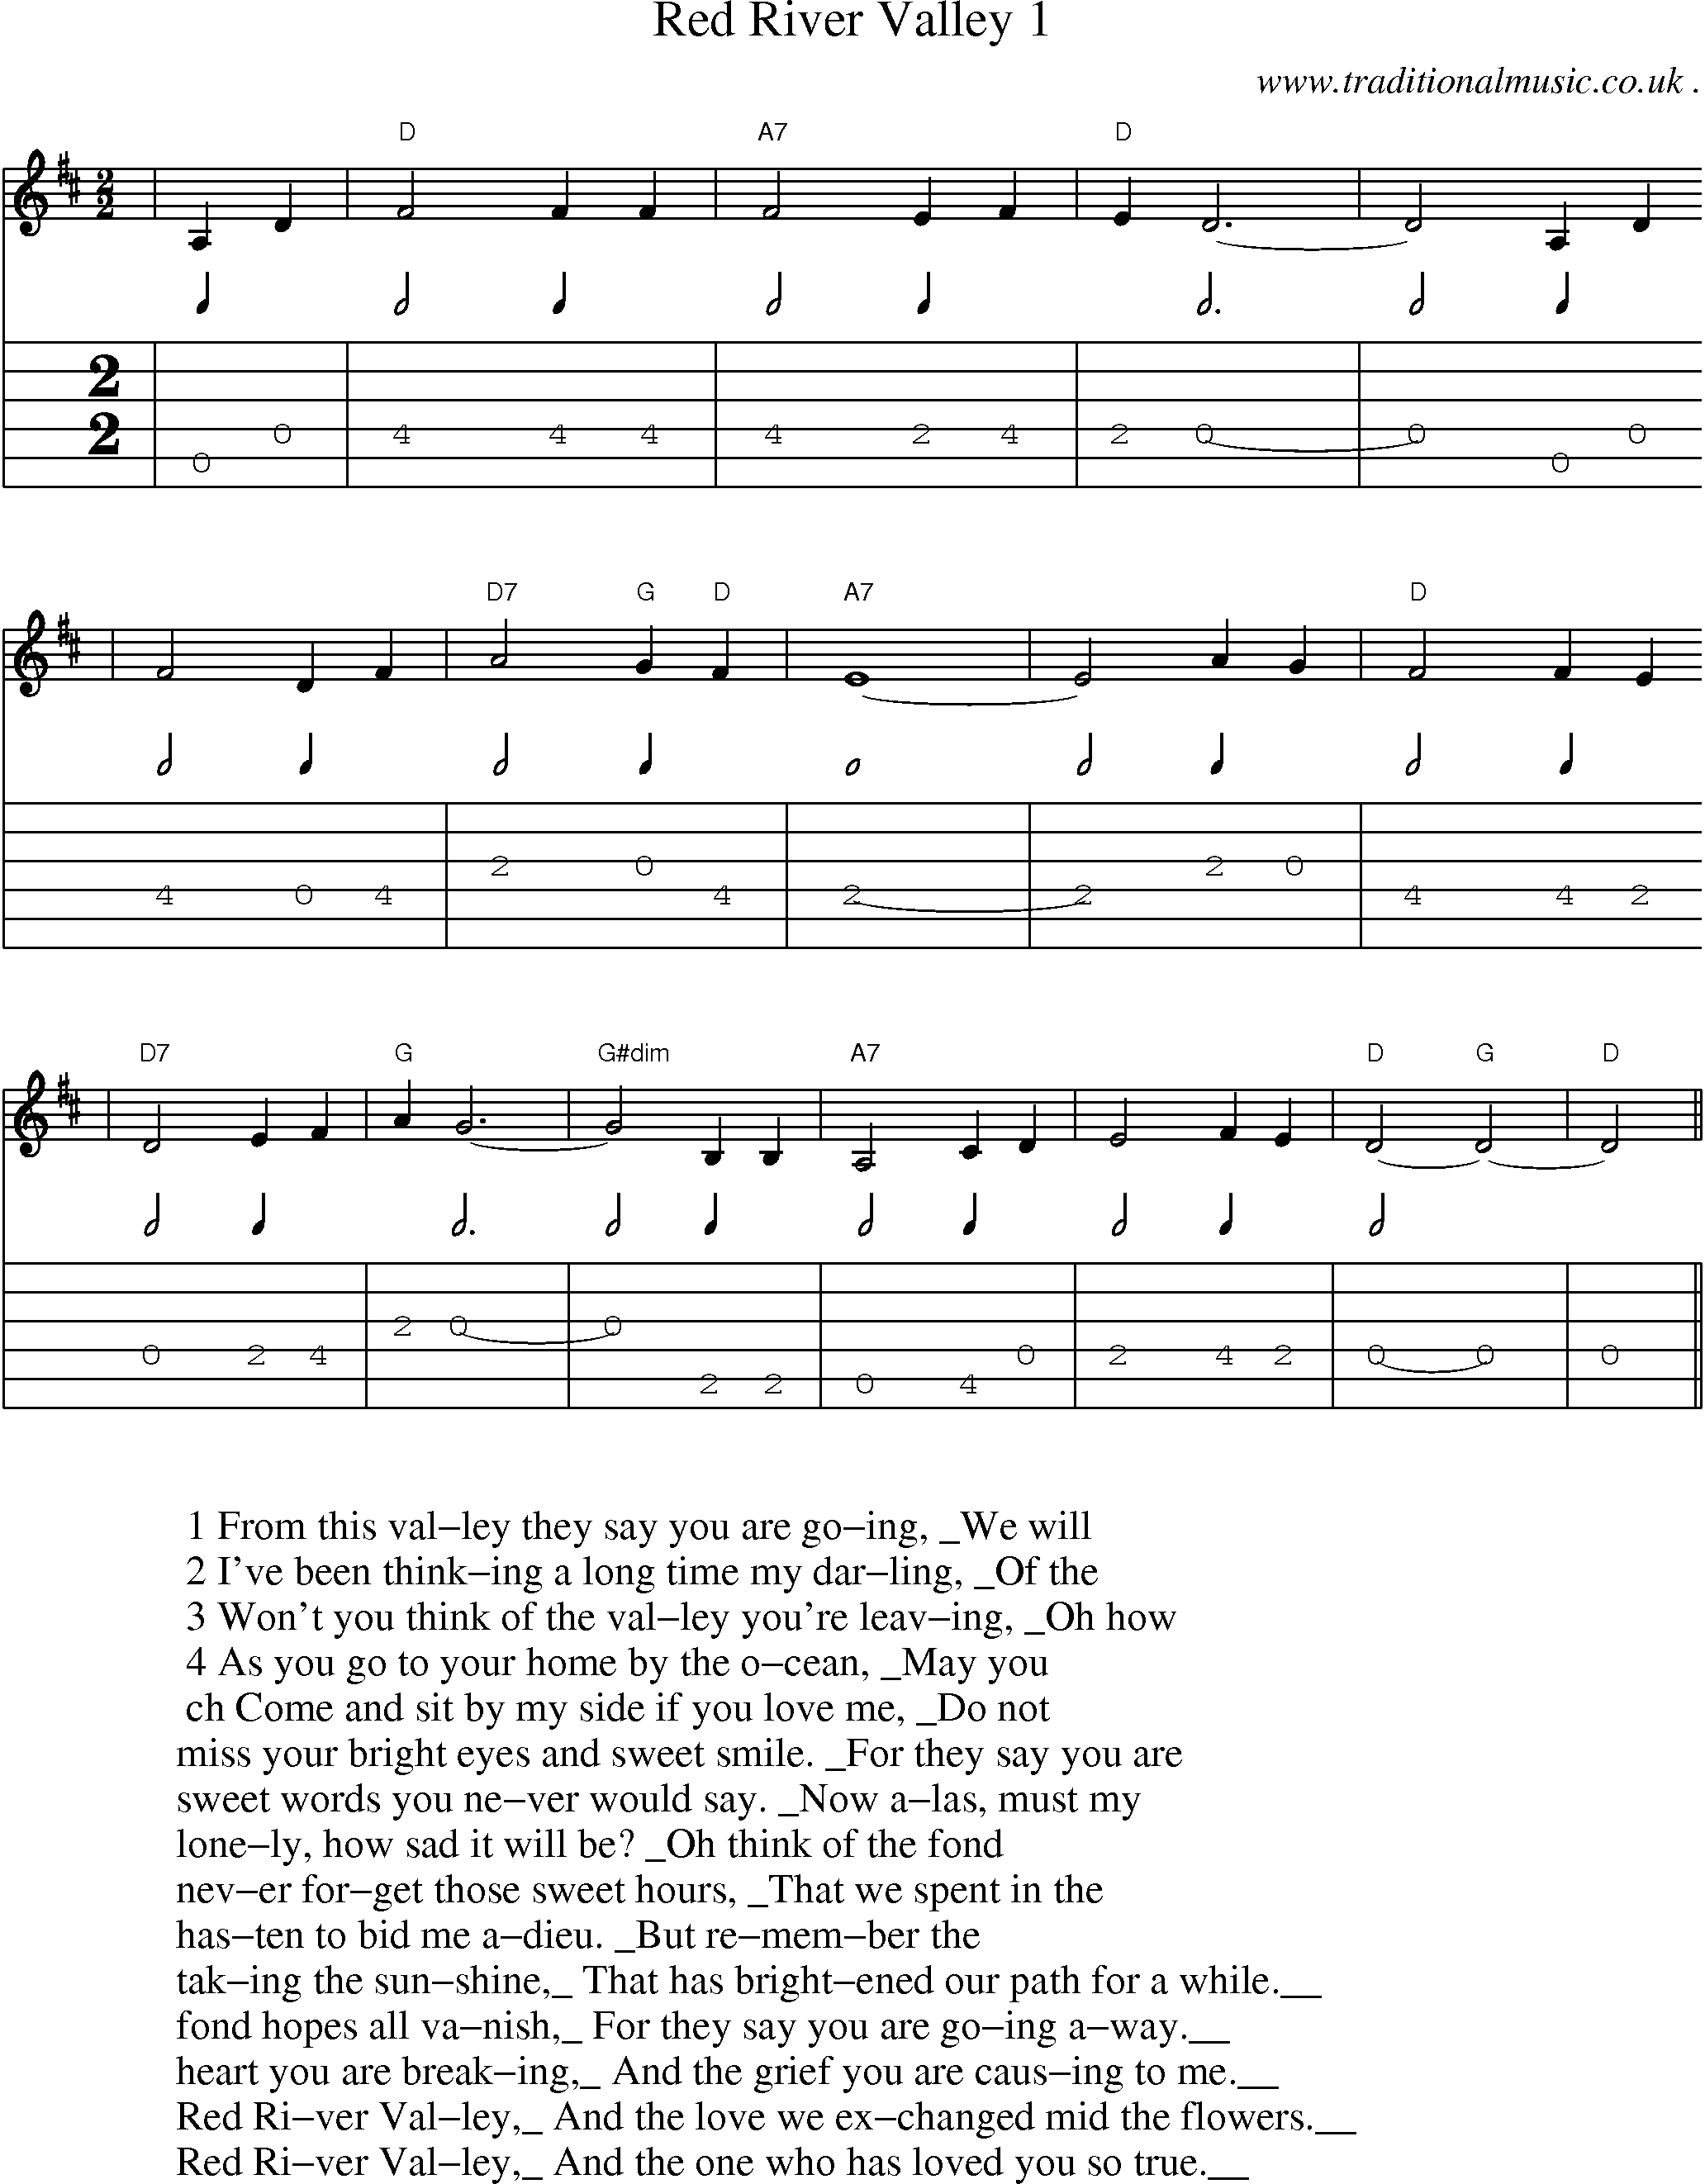 Music Score and Guitar Tabs for Red River Valley 1